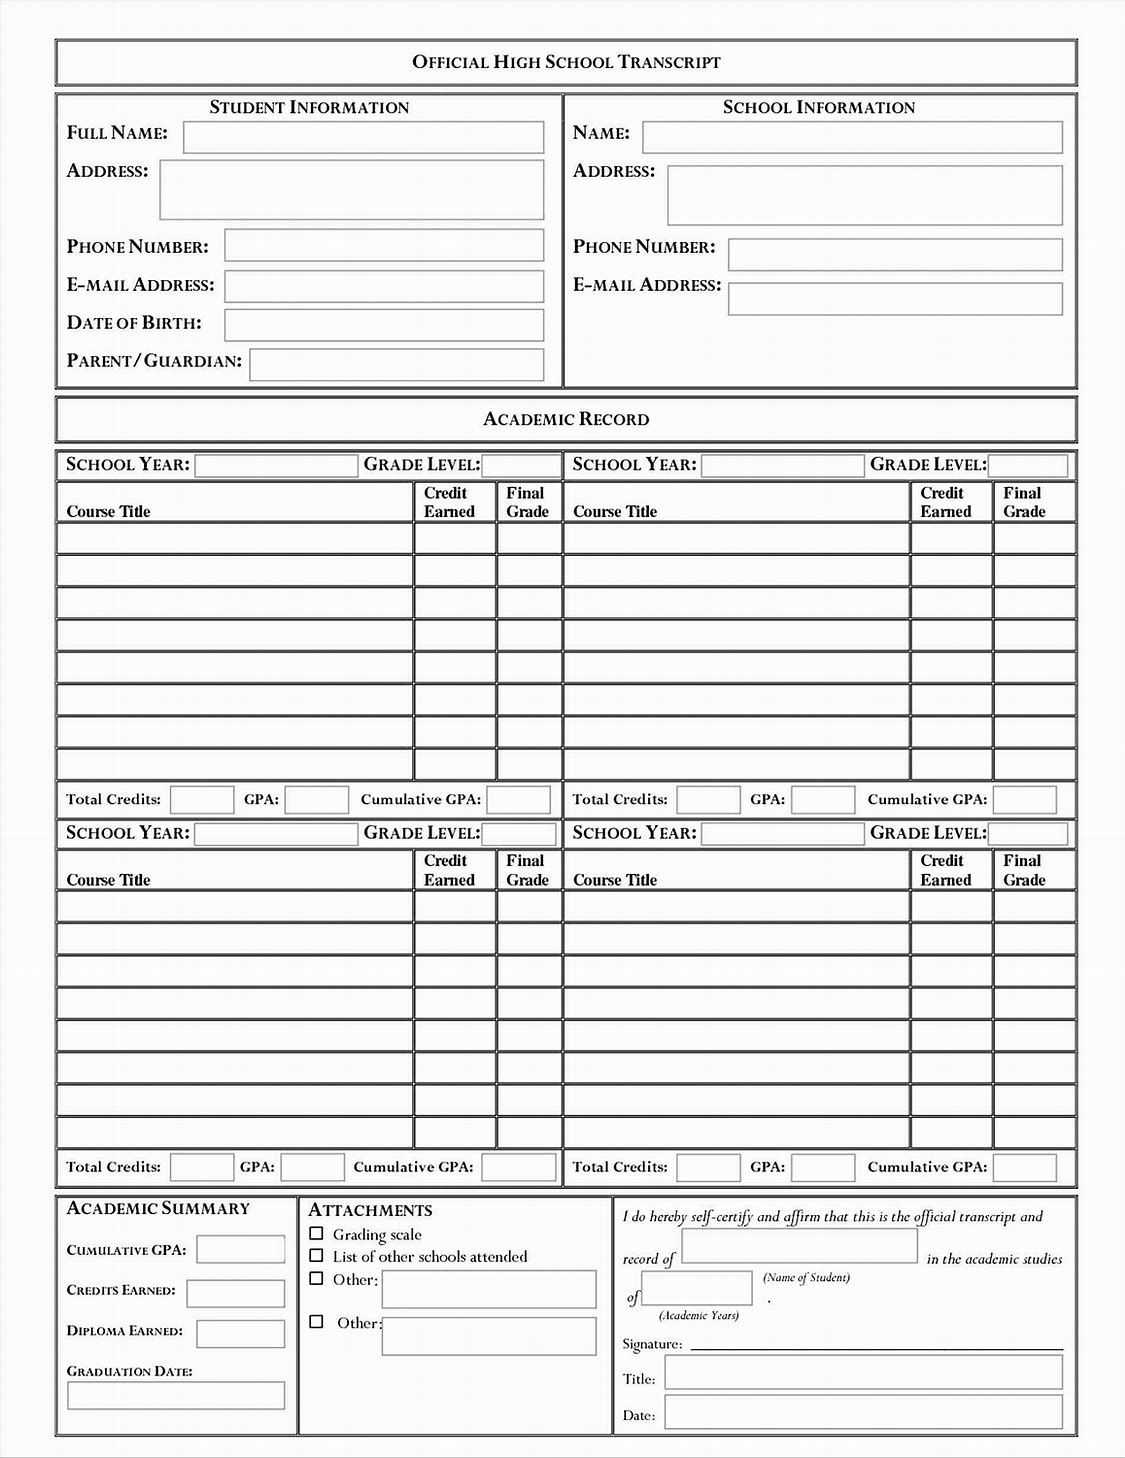 Image Result For Middle School Transcript Template | High Throughout Report Card Template Middle School